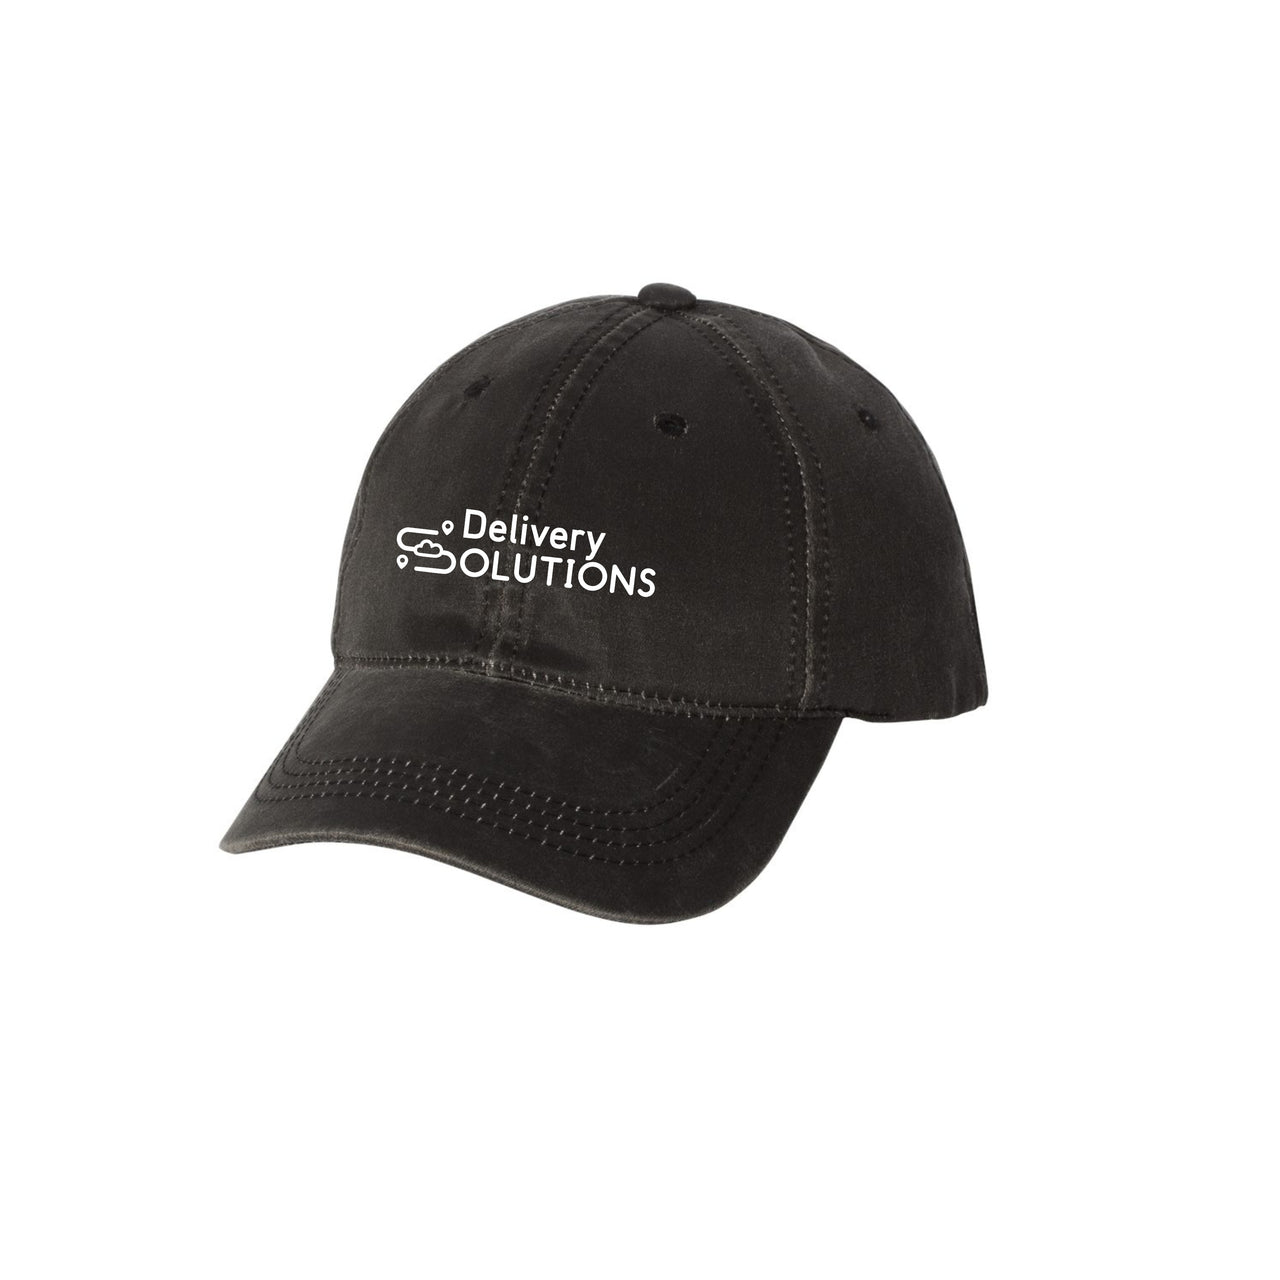 Outdoor Cap - Weathered Cap - (Delivery Solutions)